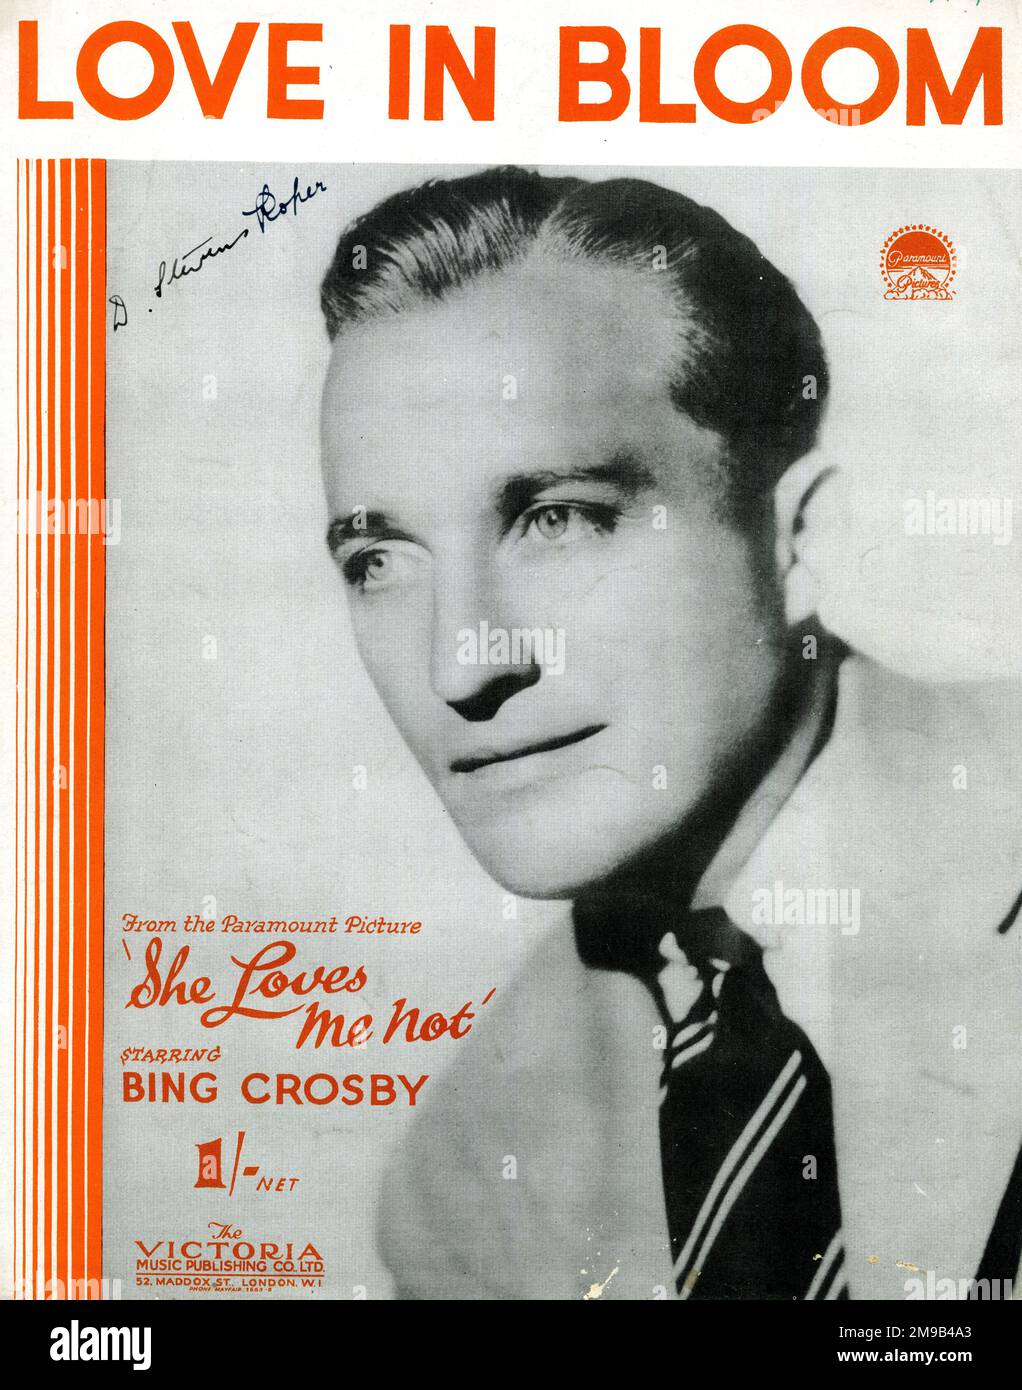 Music cover, Love in Bloom, from the Paramount Picture, She Loves Me Not, starring Bing Crosby. Stock Photo